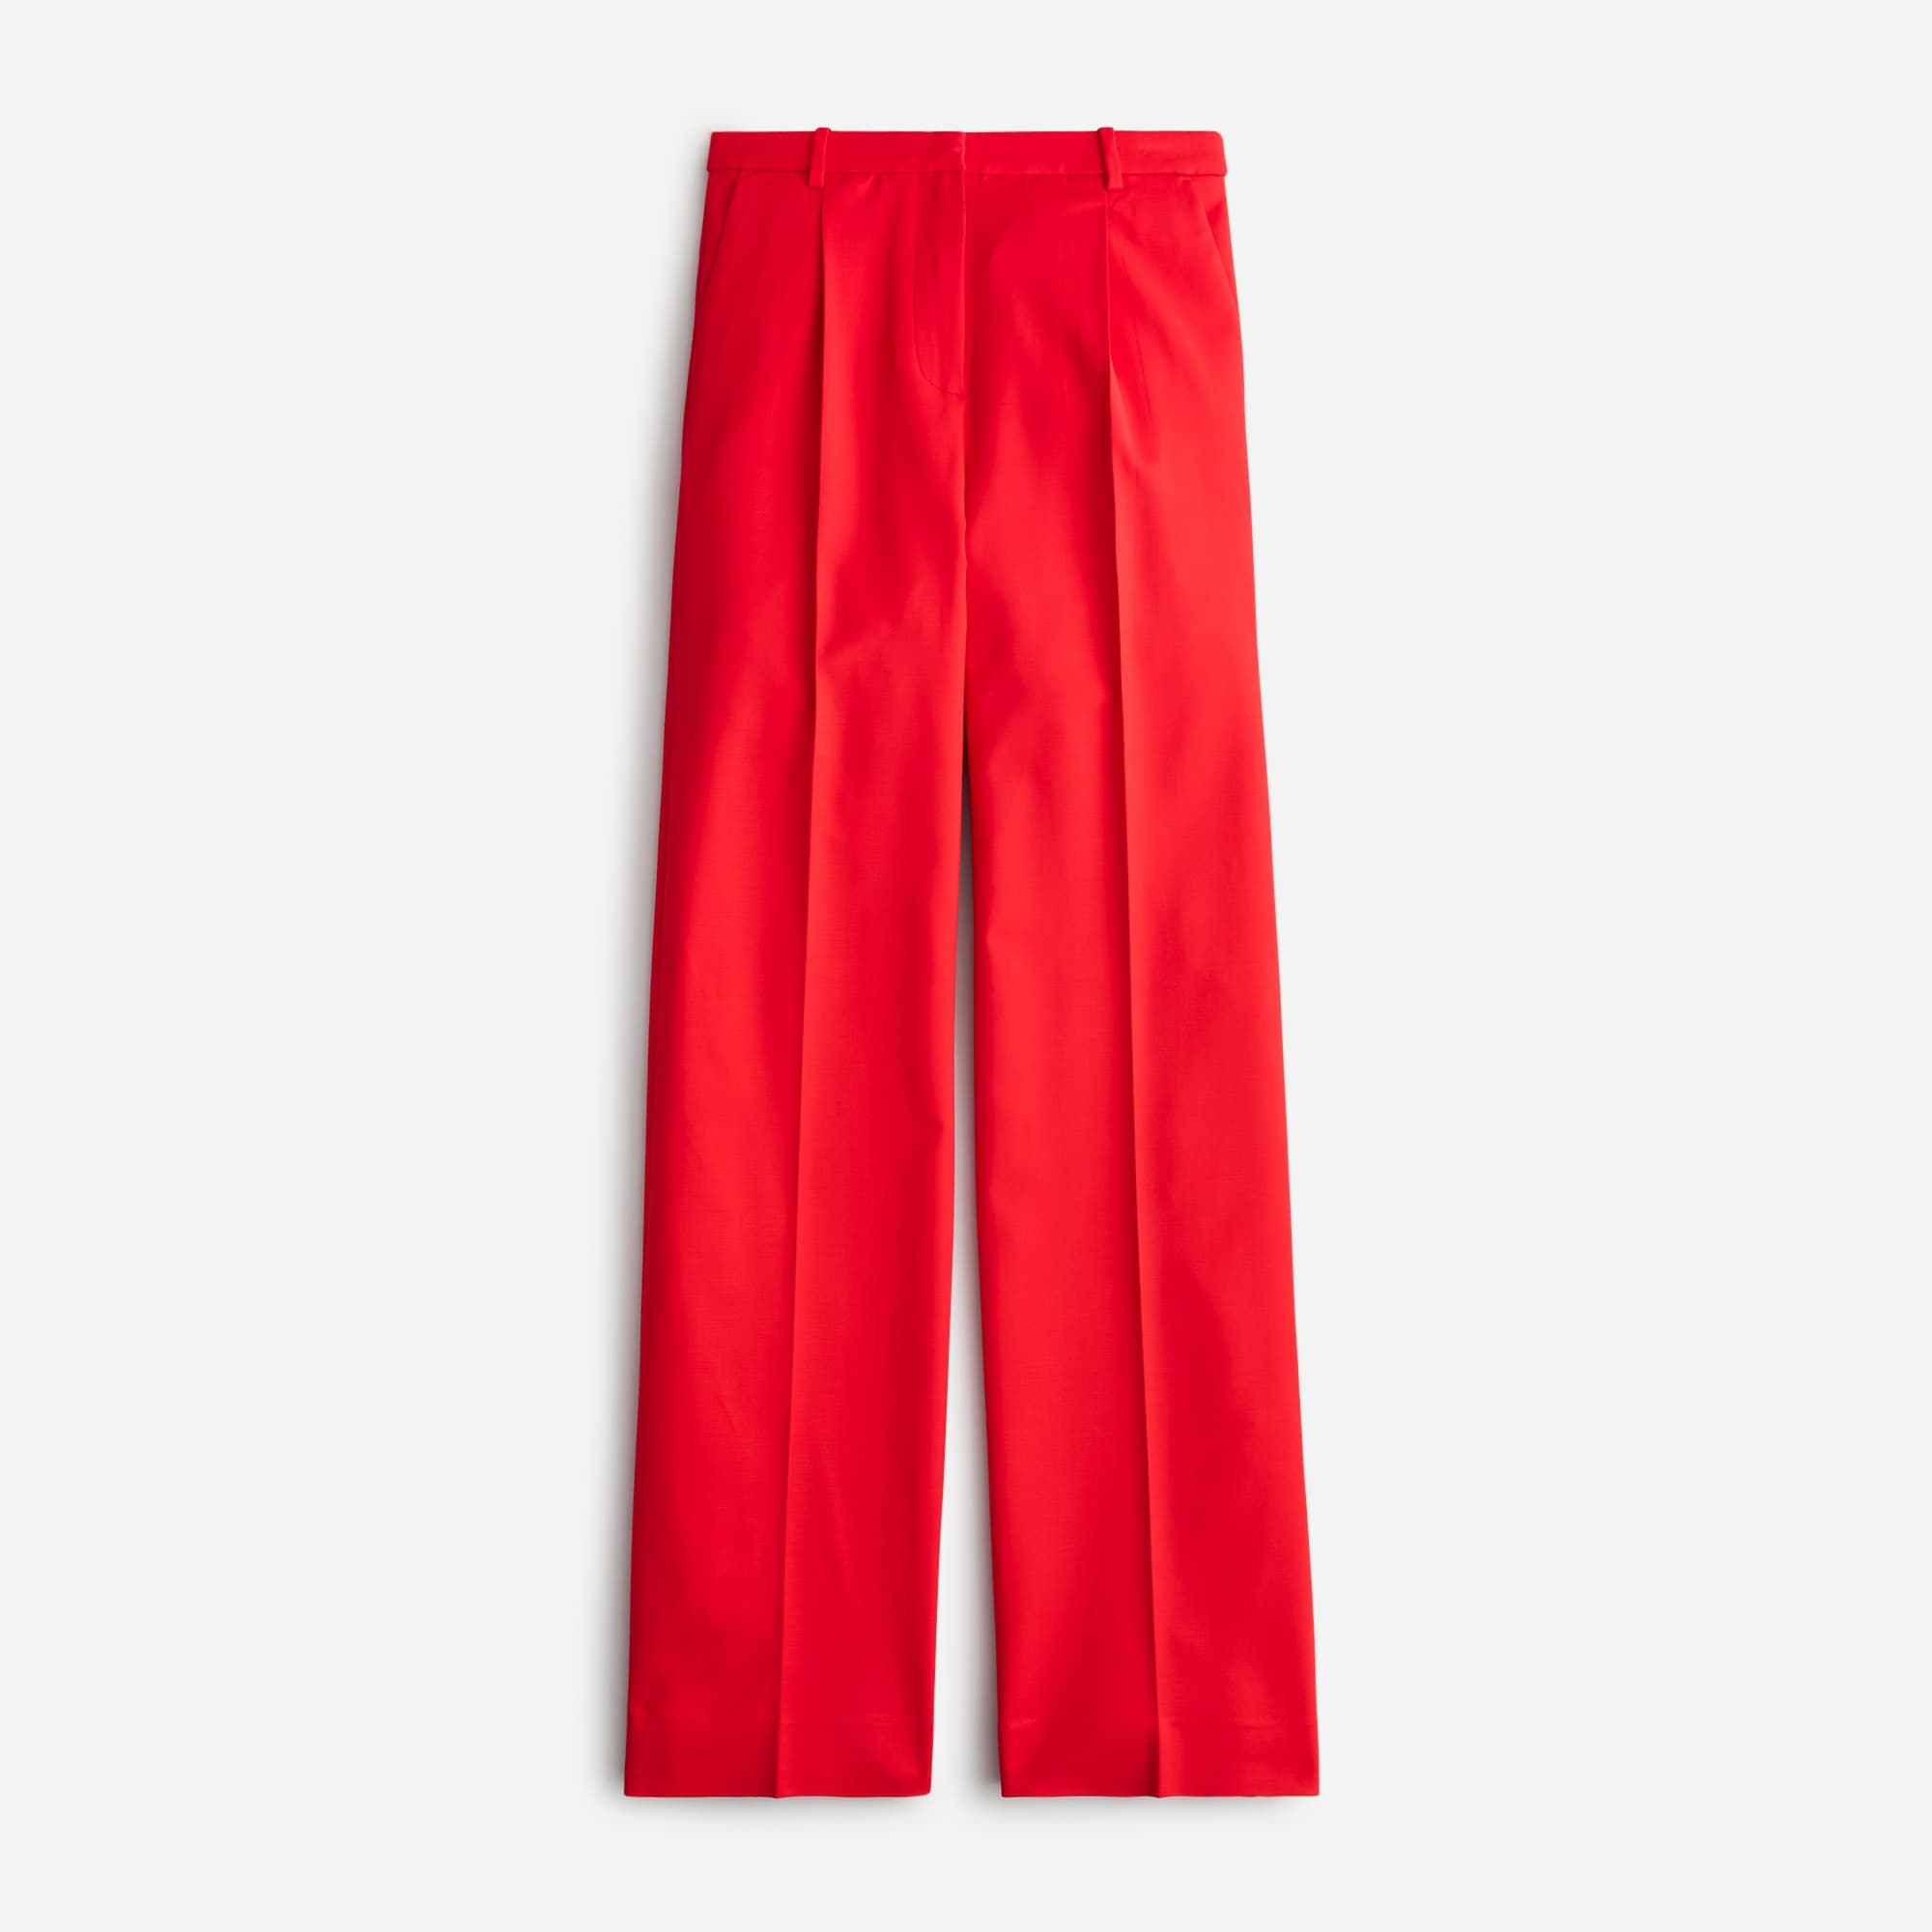 womens Wide-leg essential pant in city twill